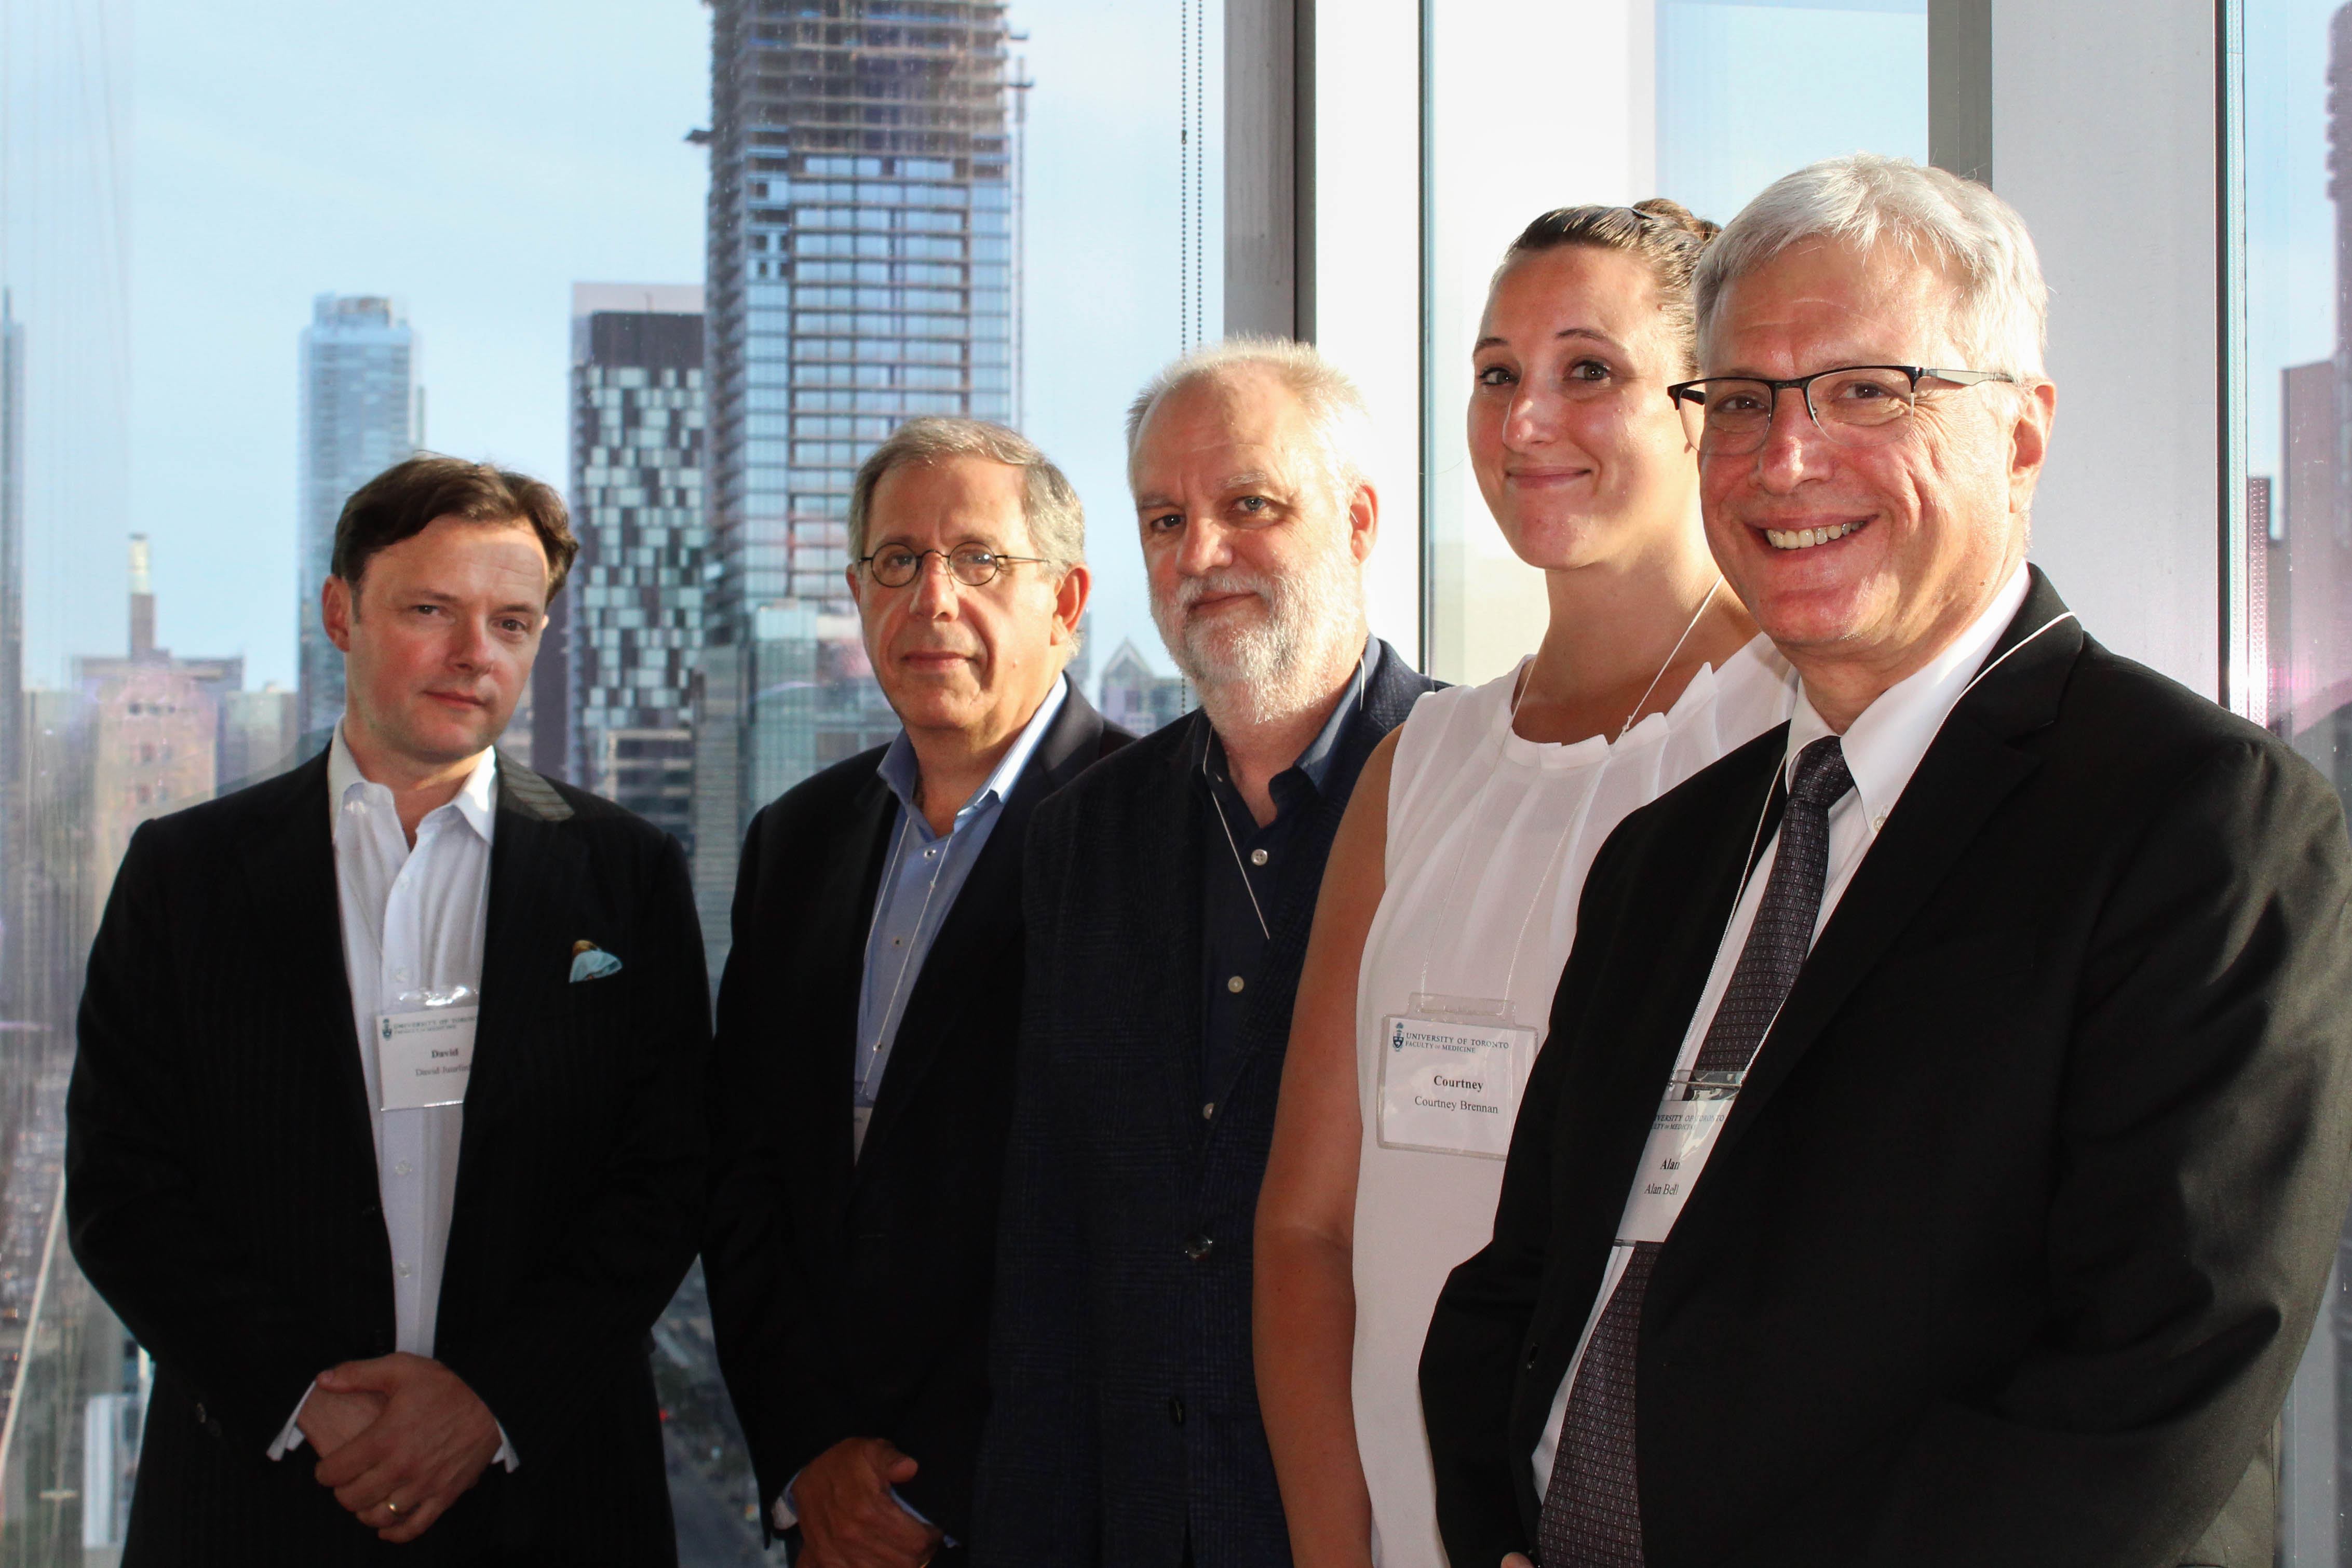 Photo of UofTMedTalks panelists, from left: David Juurlink, Anthony Feinstein, André Picard, Courtney Brennan and Alan Bell 